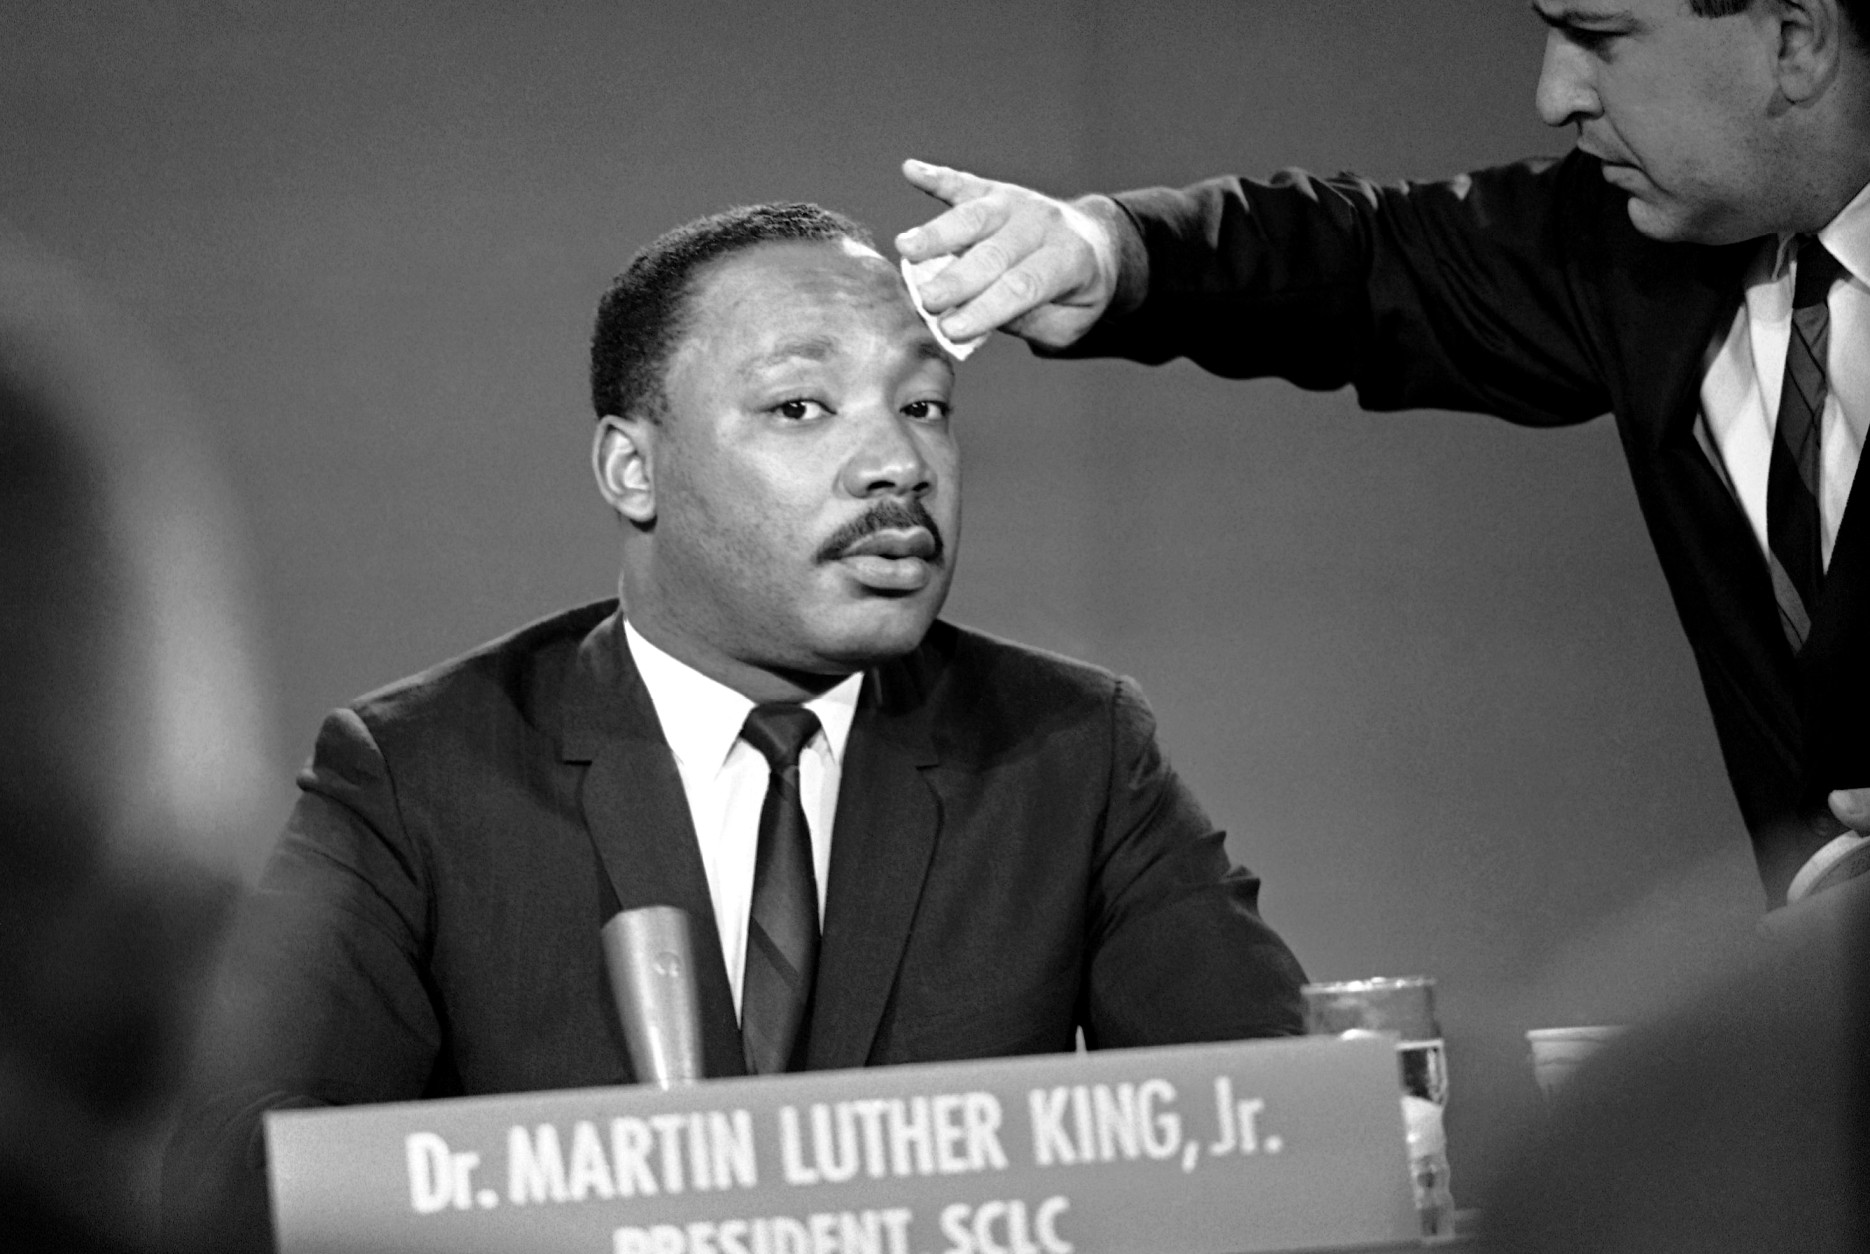 A makeup man puts a little powder on Martin Luther King's brow before a television program in Washington, Aug. 13, 1957. The president of the Southern Christian Leadership Conference discussed the current racial situation on NBC's "Meet the Press" program. (AP Photo/Henry Burroughs)